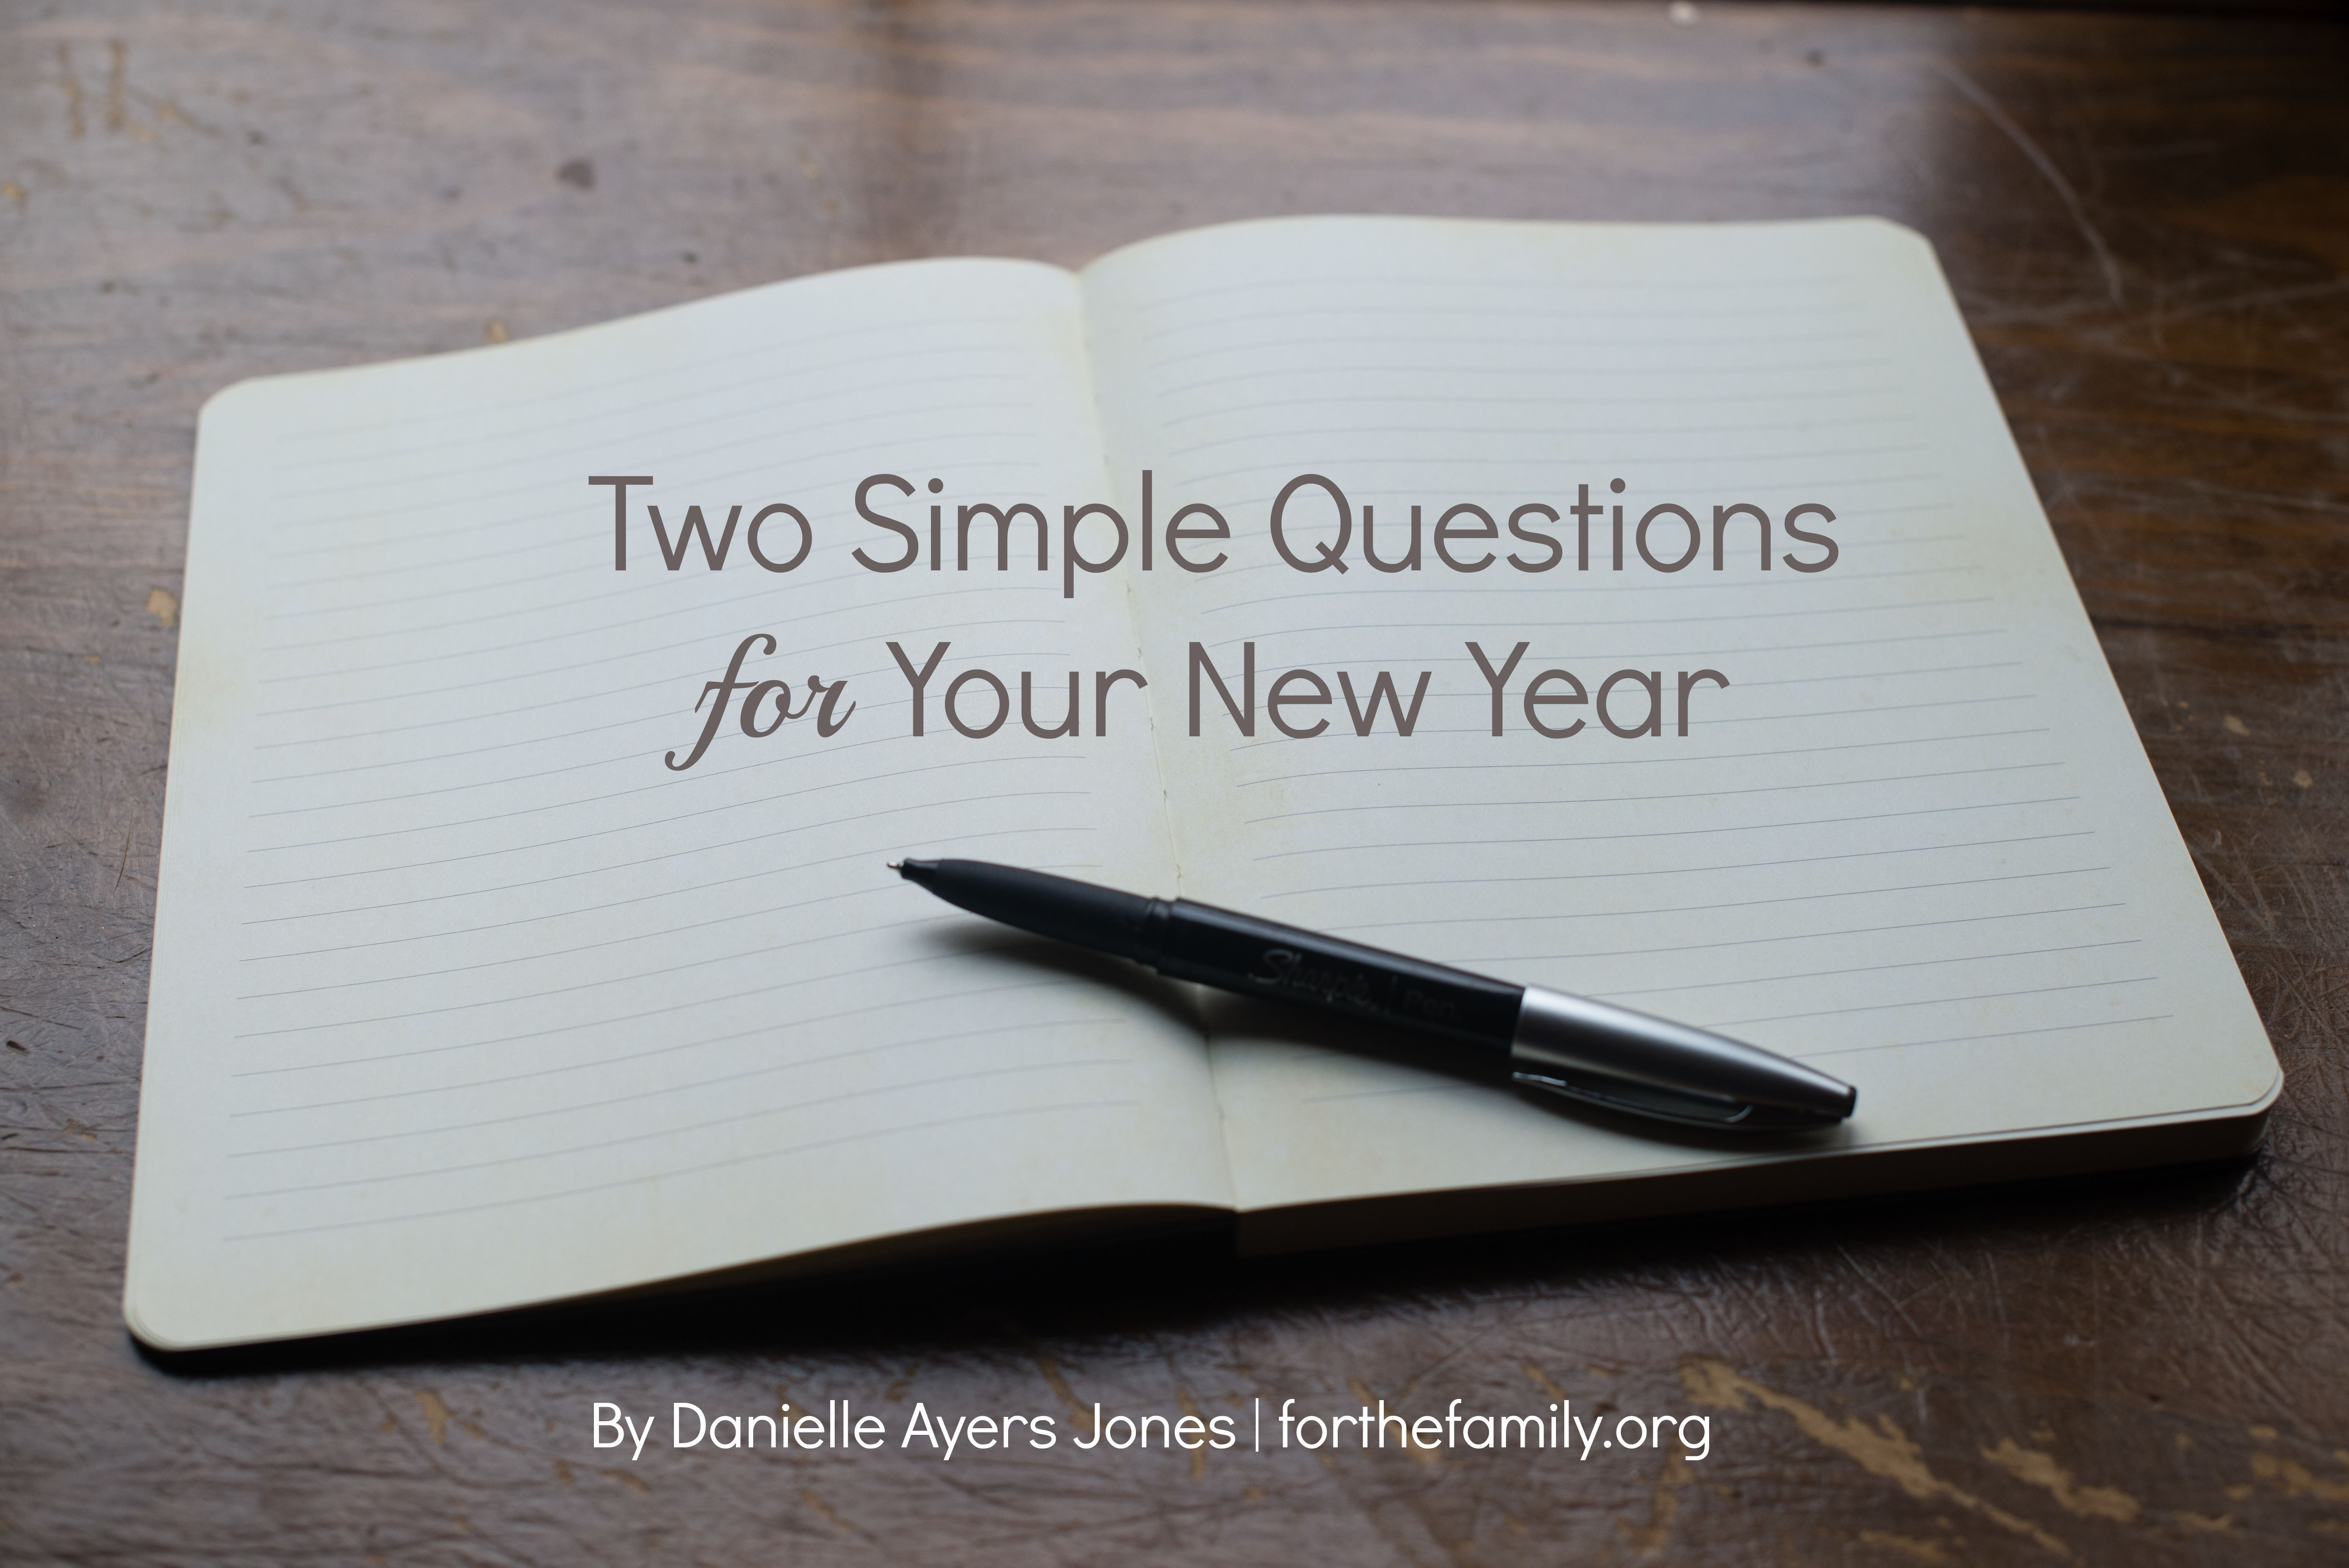 Two Simple Questions for Your New Year